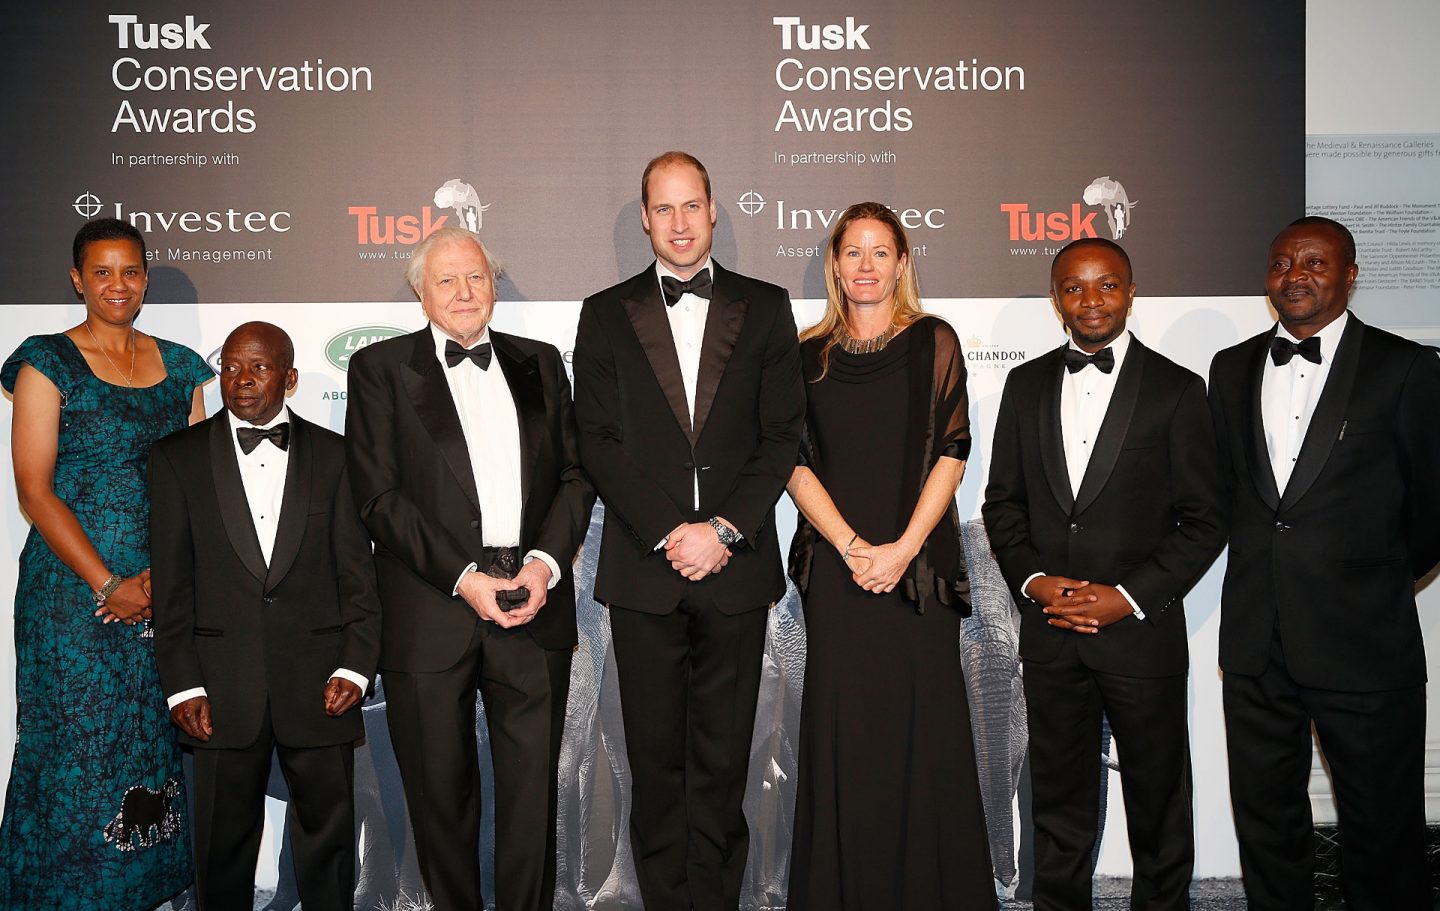 Tusk Conservation Awards 2016 Finalists